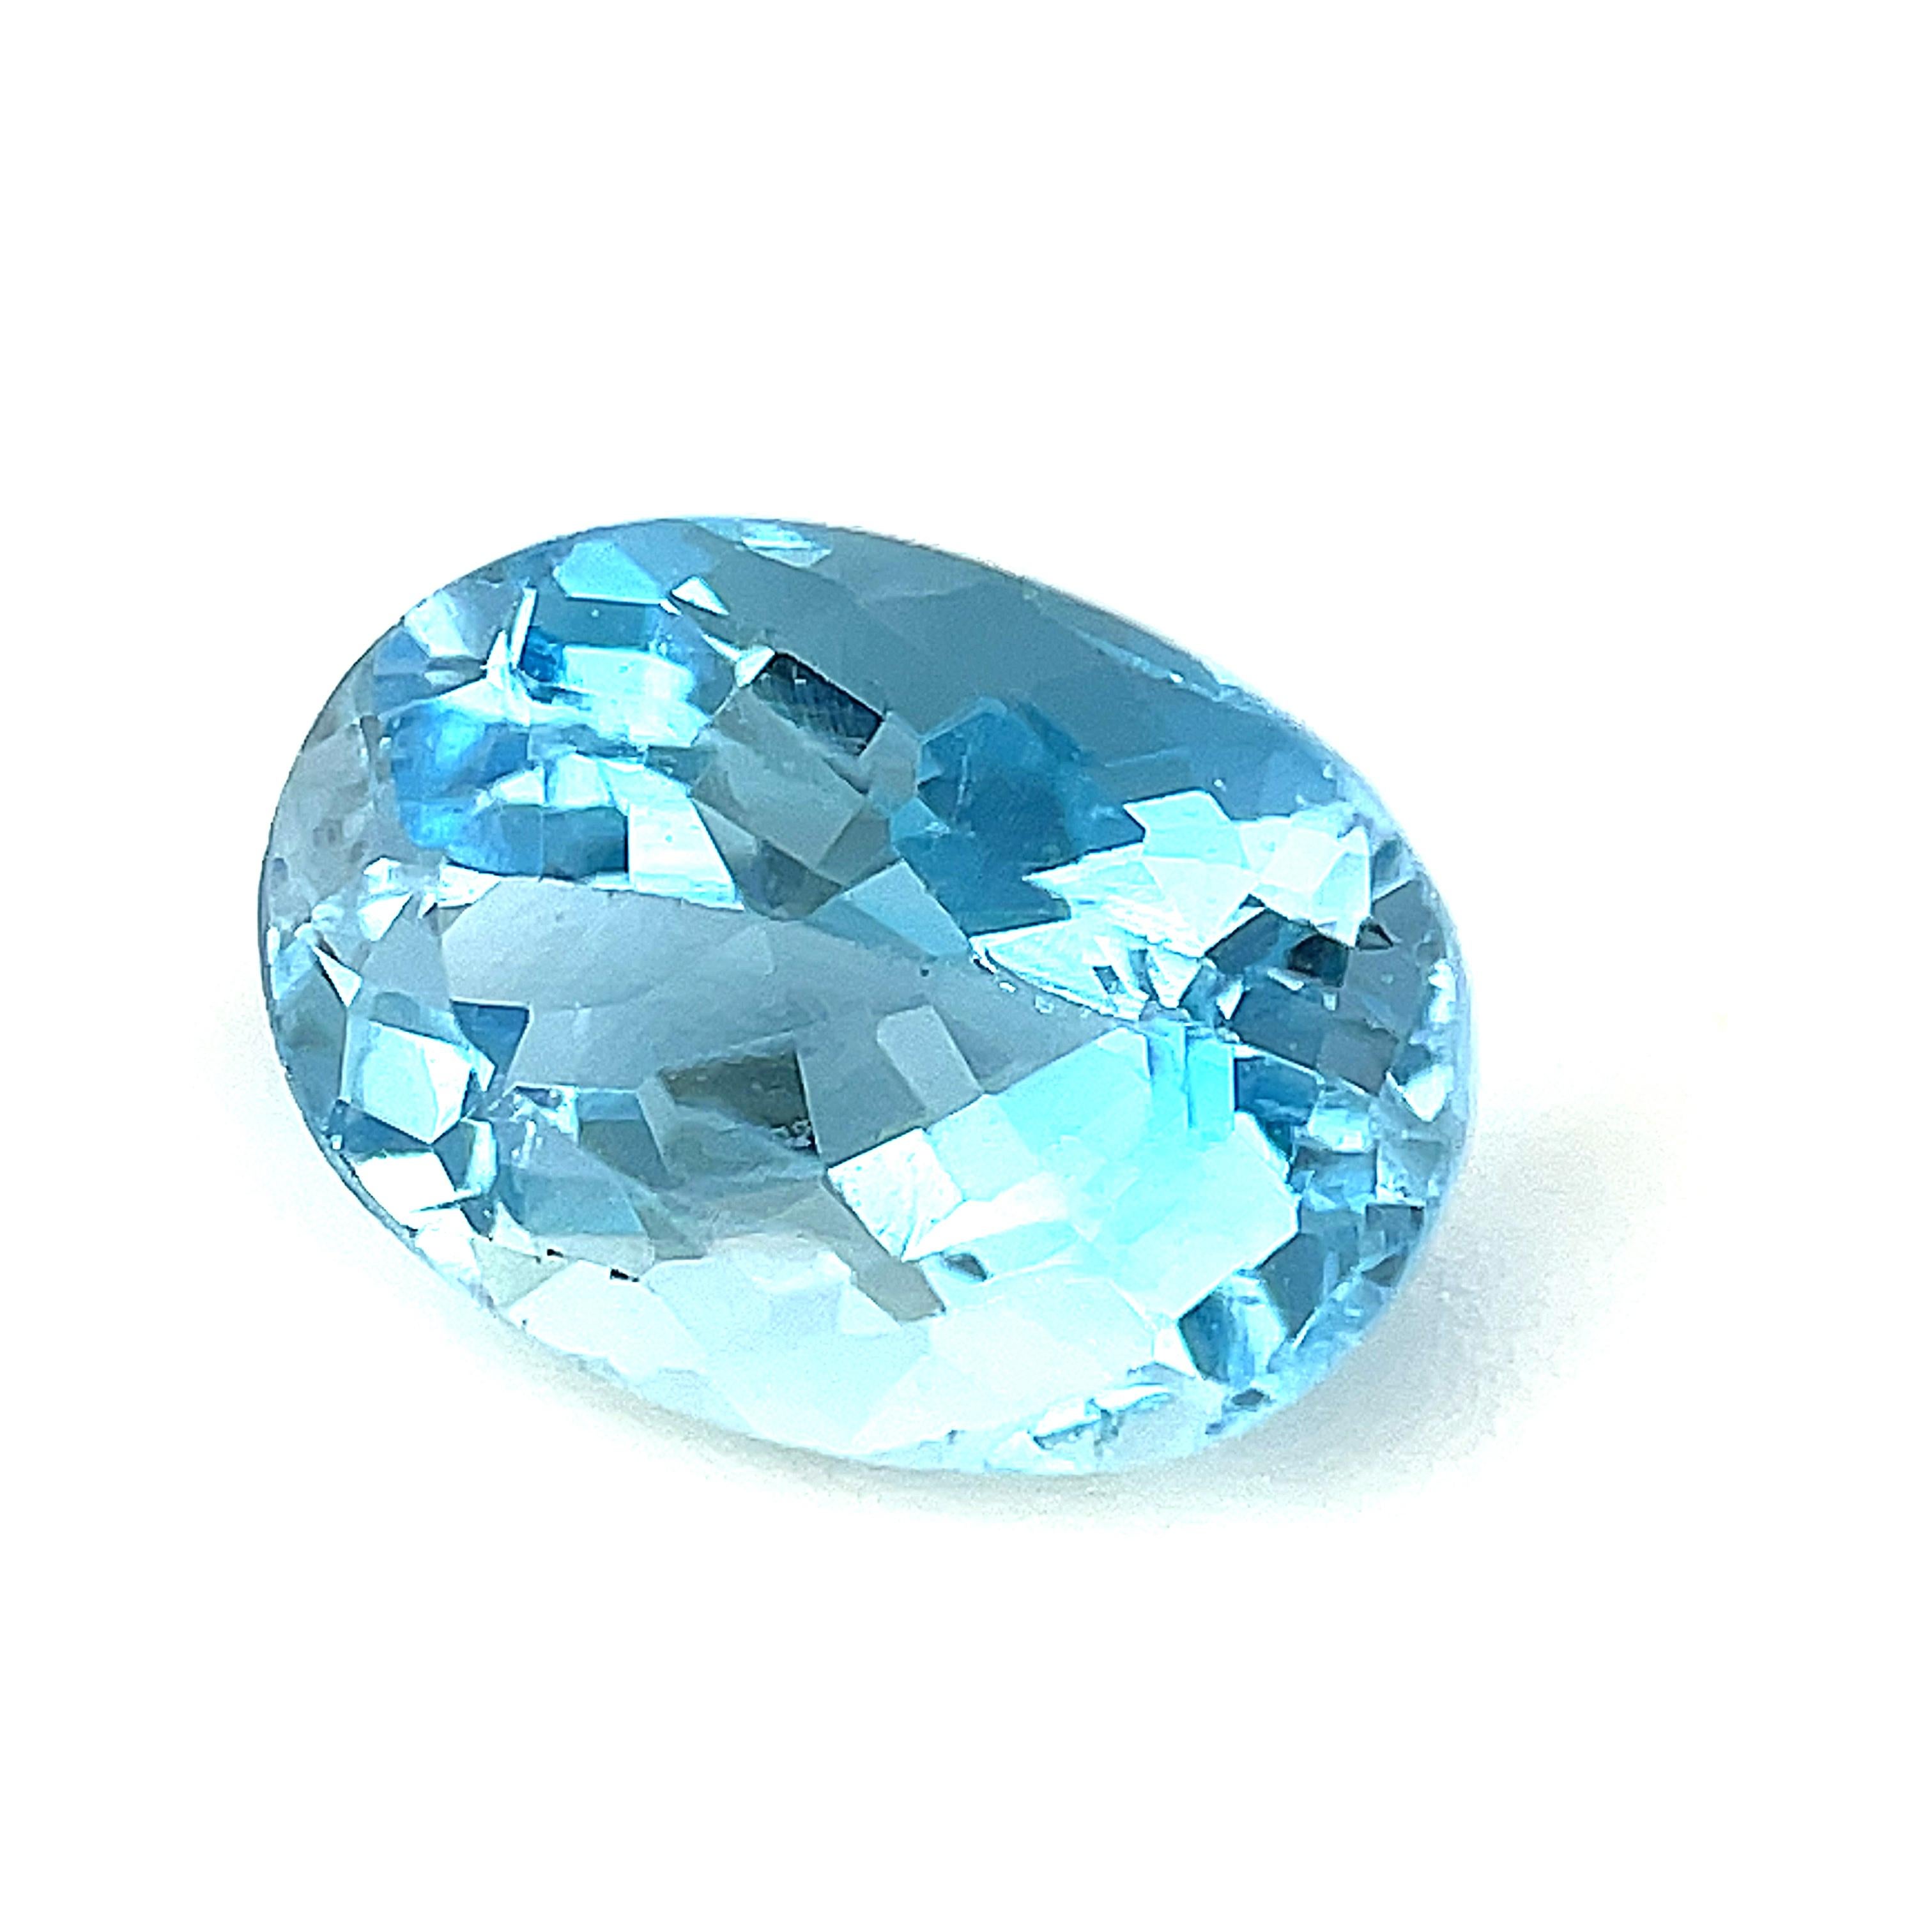 This 1.57 carat aquamarine is of the finest quality, having an unusually dark, saturated color with exceptional clarity and brilliance. It measures 8.70 x 6.17 millimeters and it would look stunning set in either white or yellow gold, with or